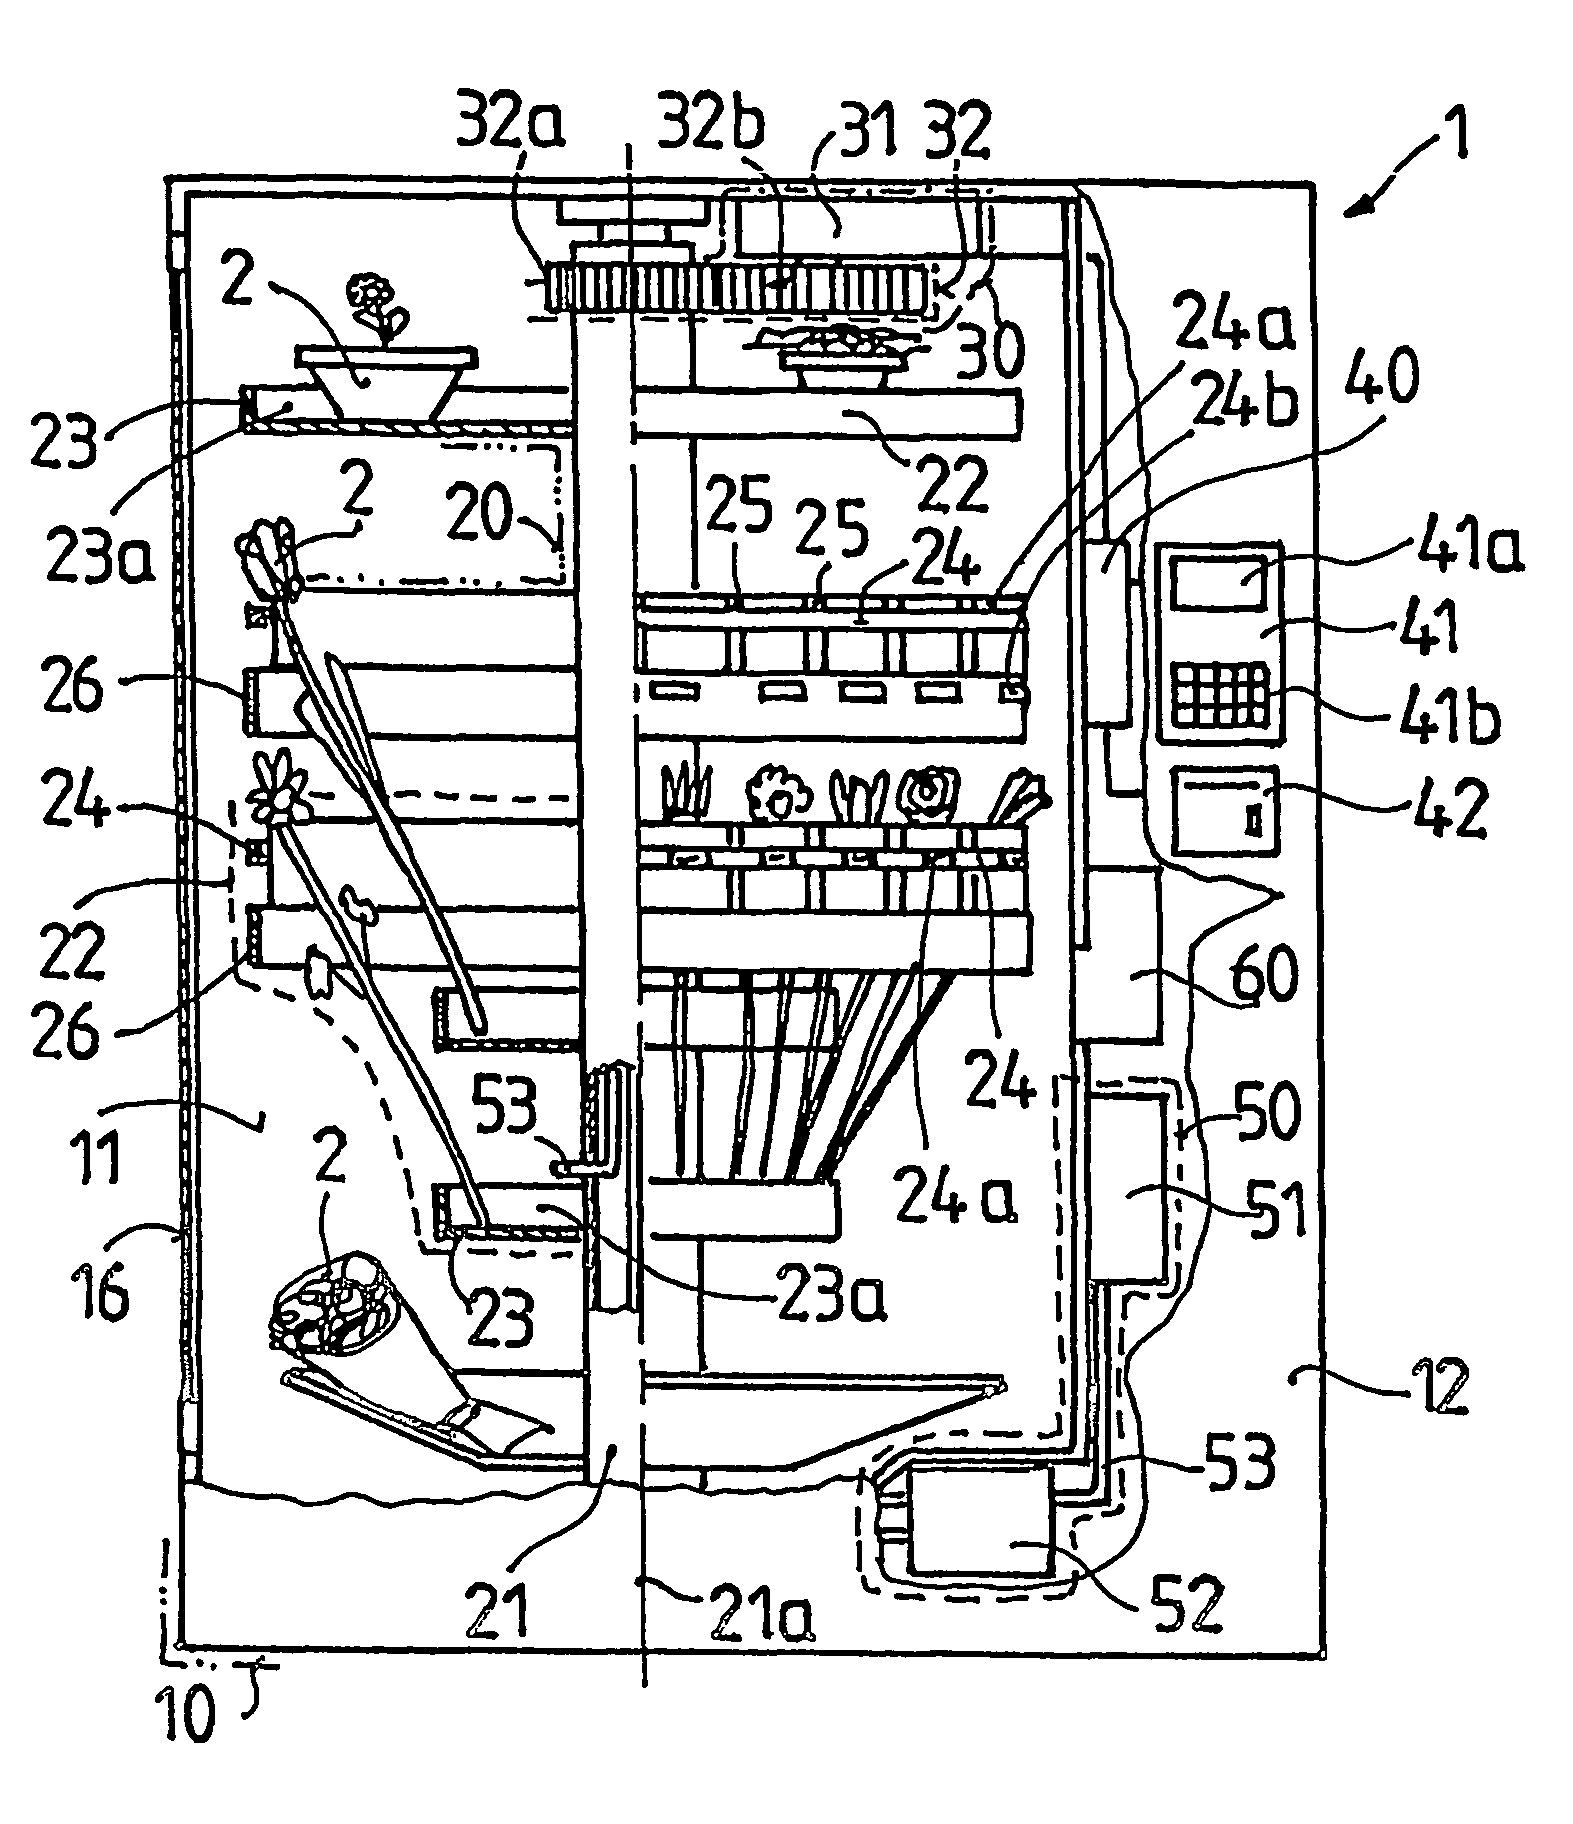 Automatic flower-selling equipment